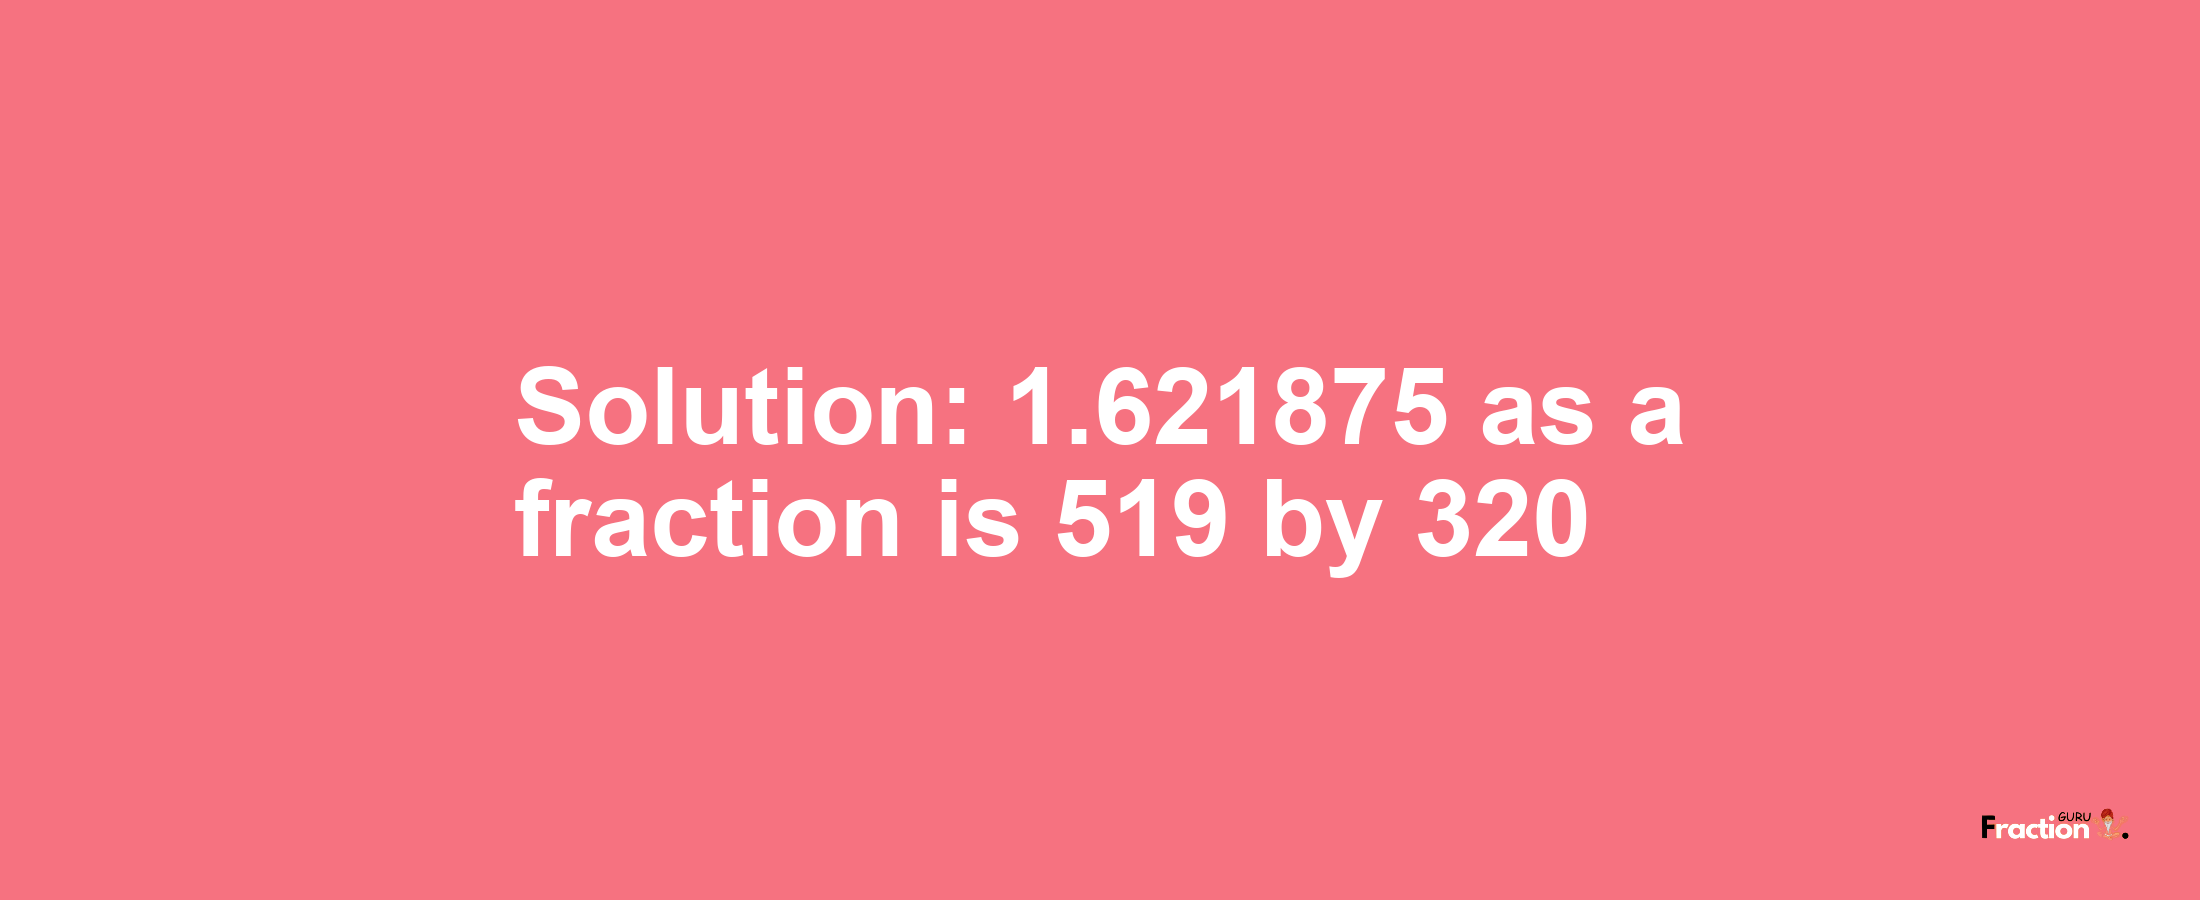 Solution:1.621875 as a fraction is 519/320